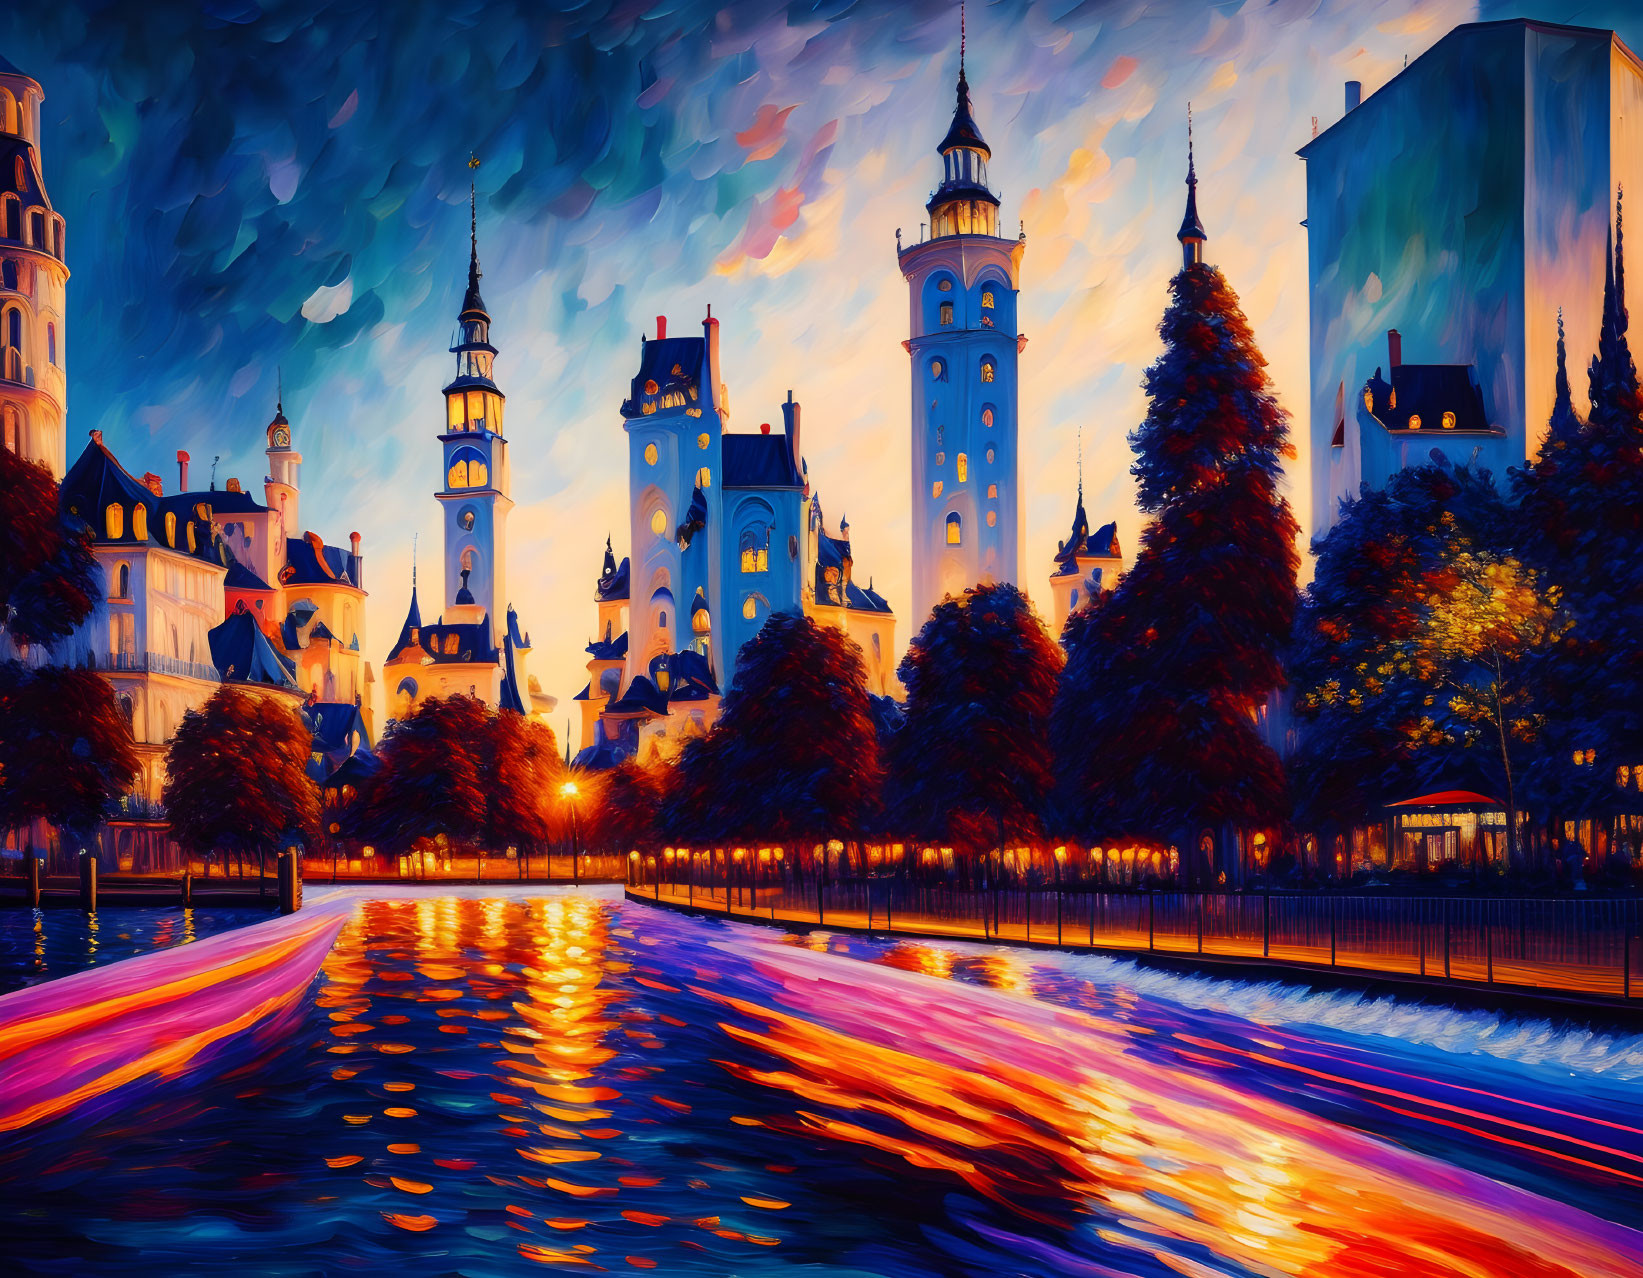 Colorful Cityscape Painting: Illuminated Buildings Along River at Dusk